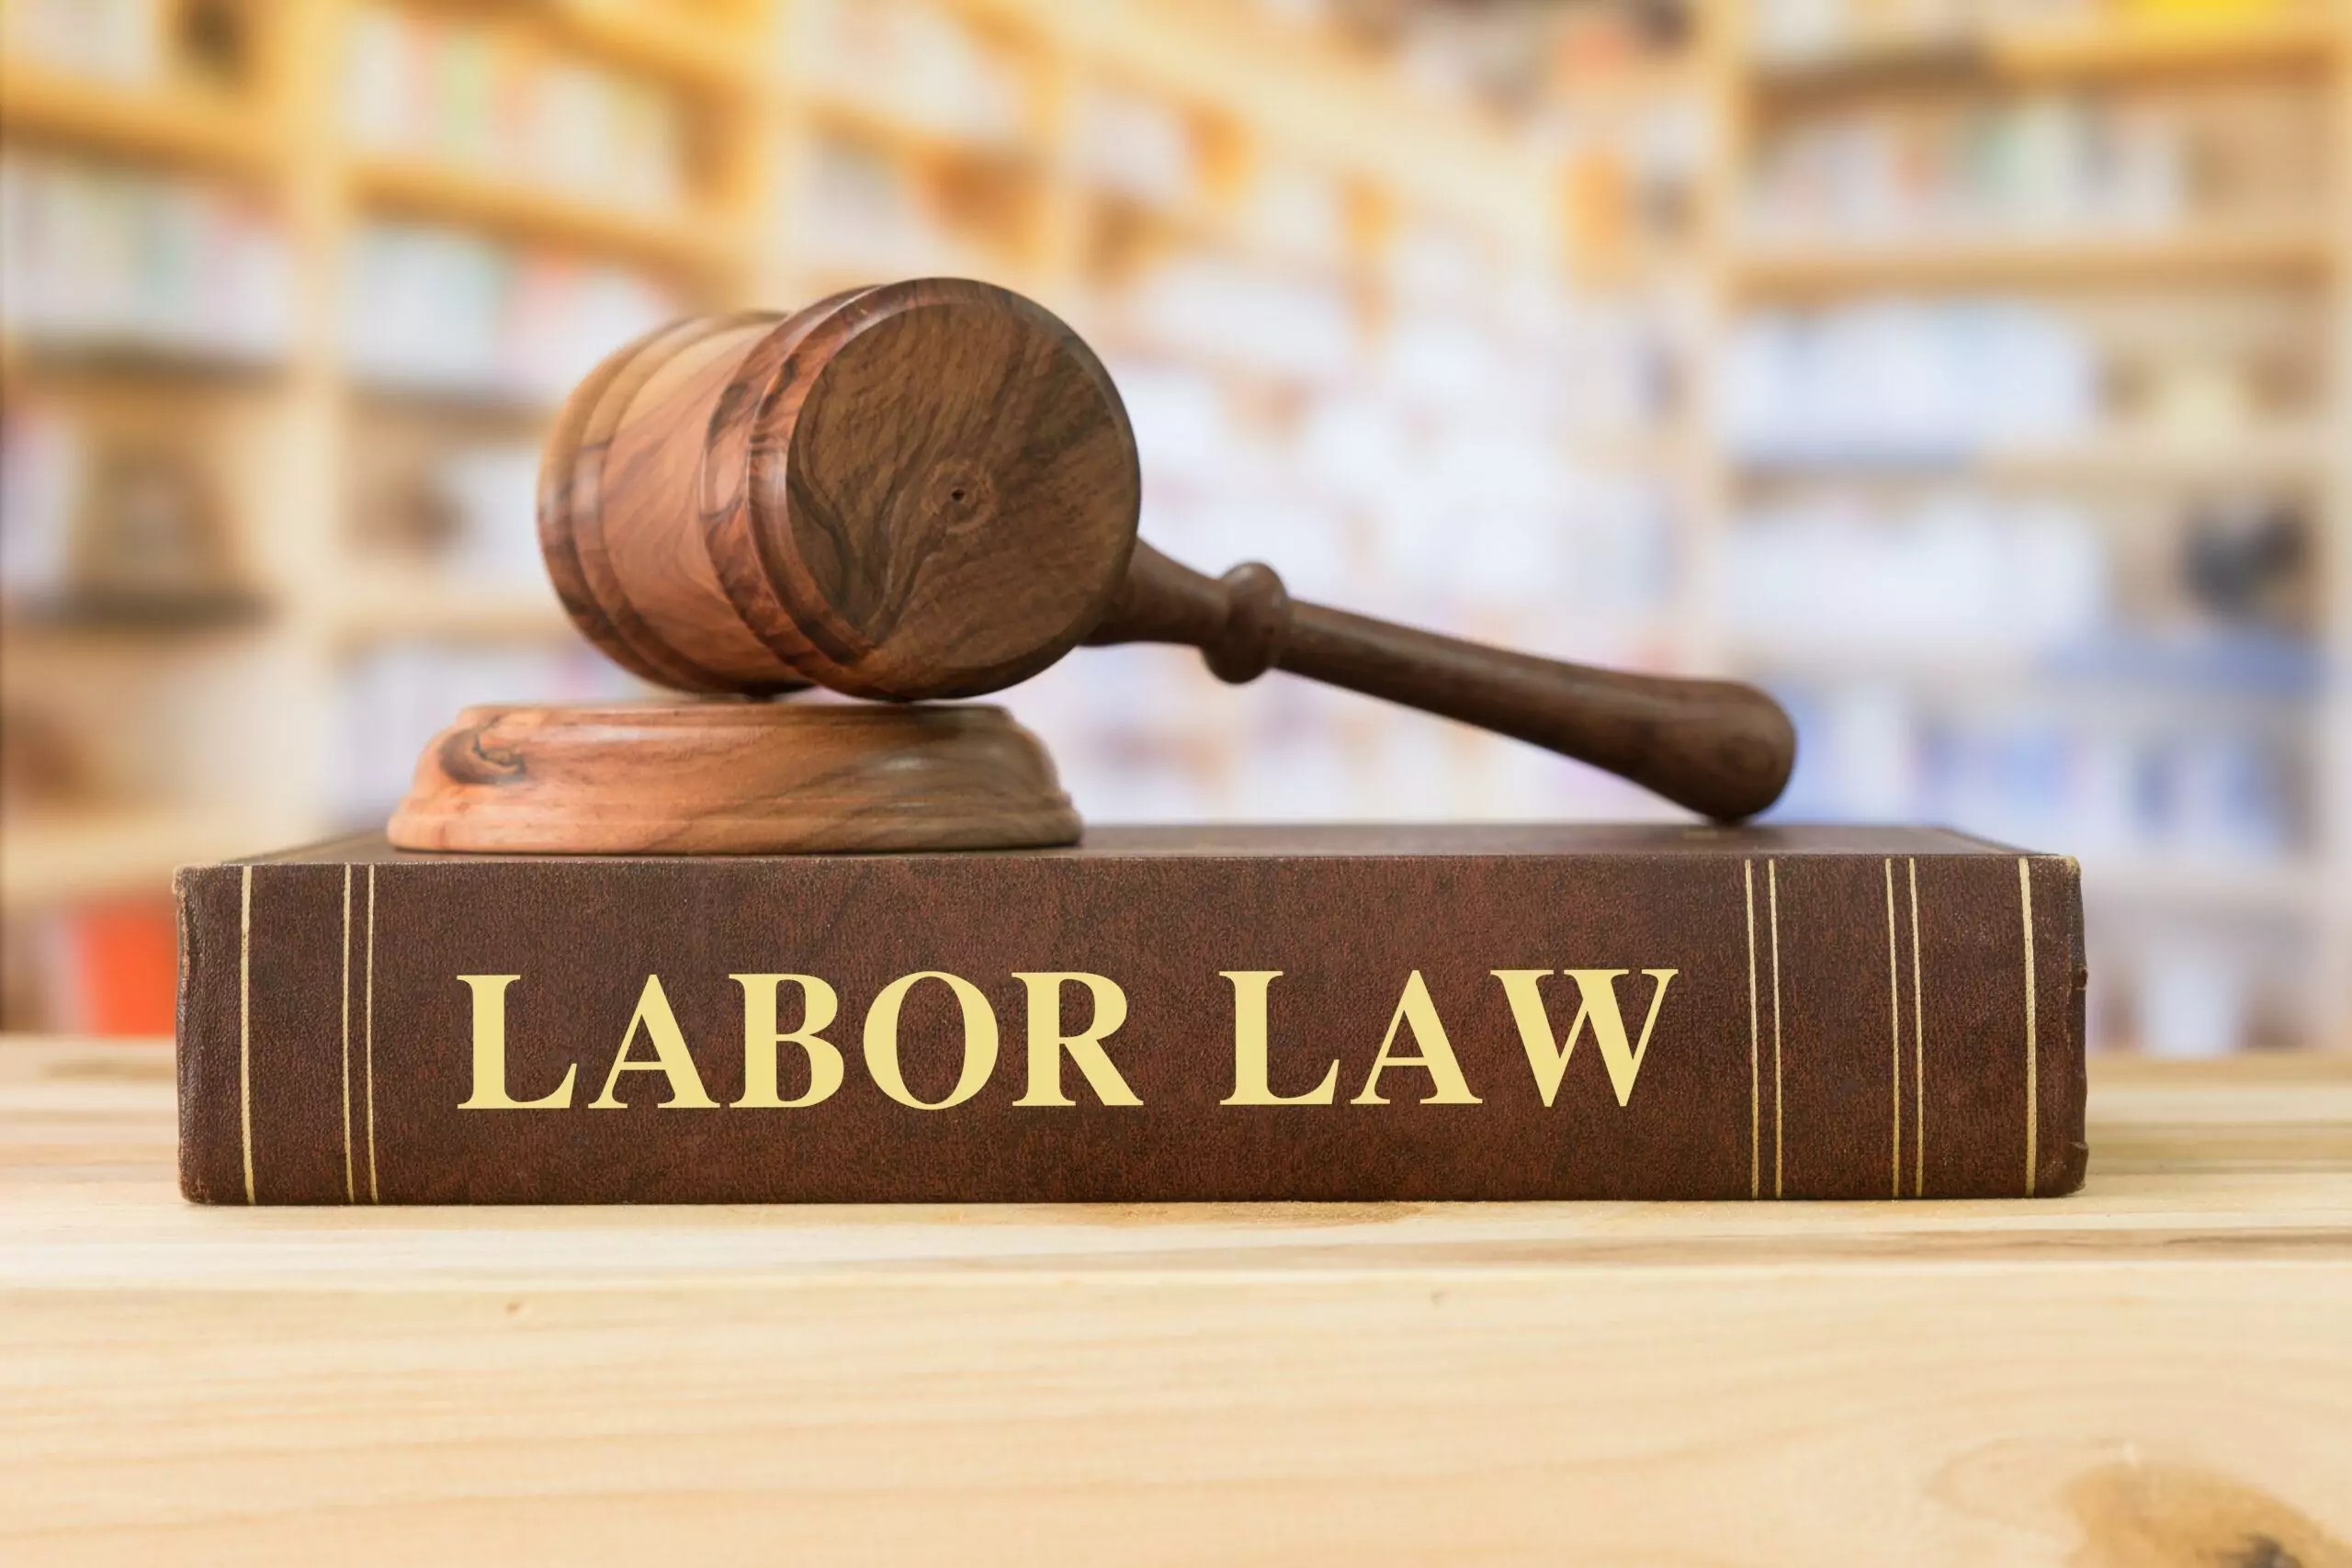 Labor Law books with a judges gavel on desk in the library